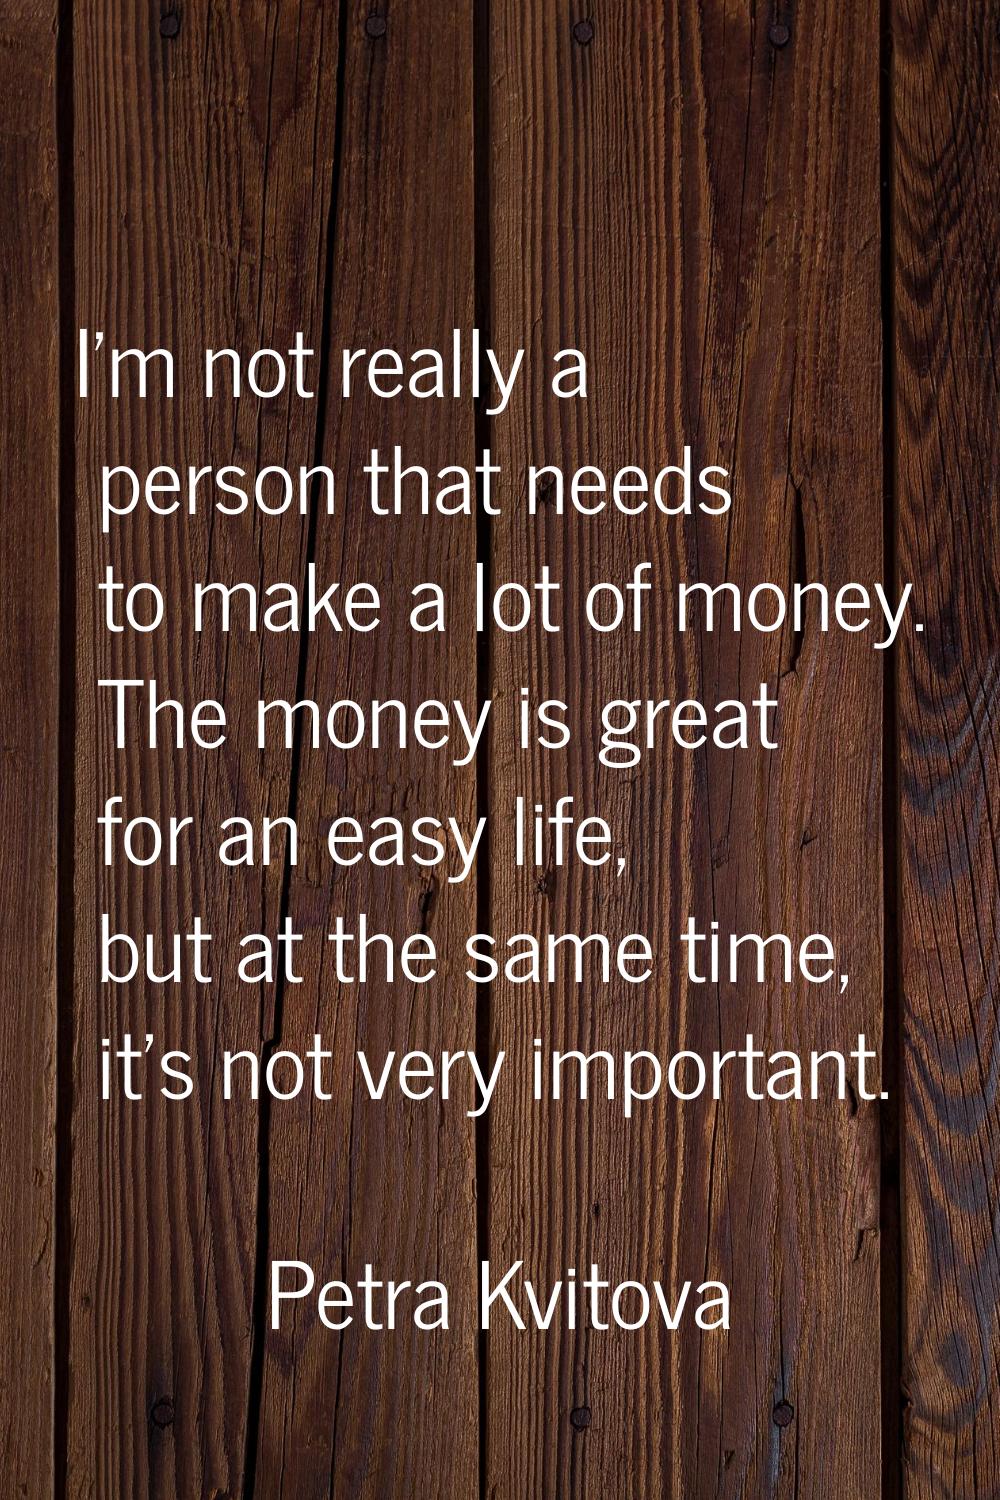 I'm not really a person that needs to make a lot of money. The money is great for an easy life, but